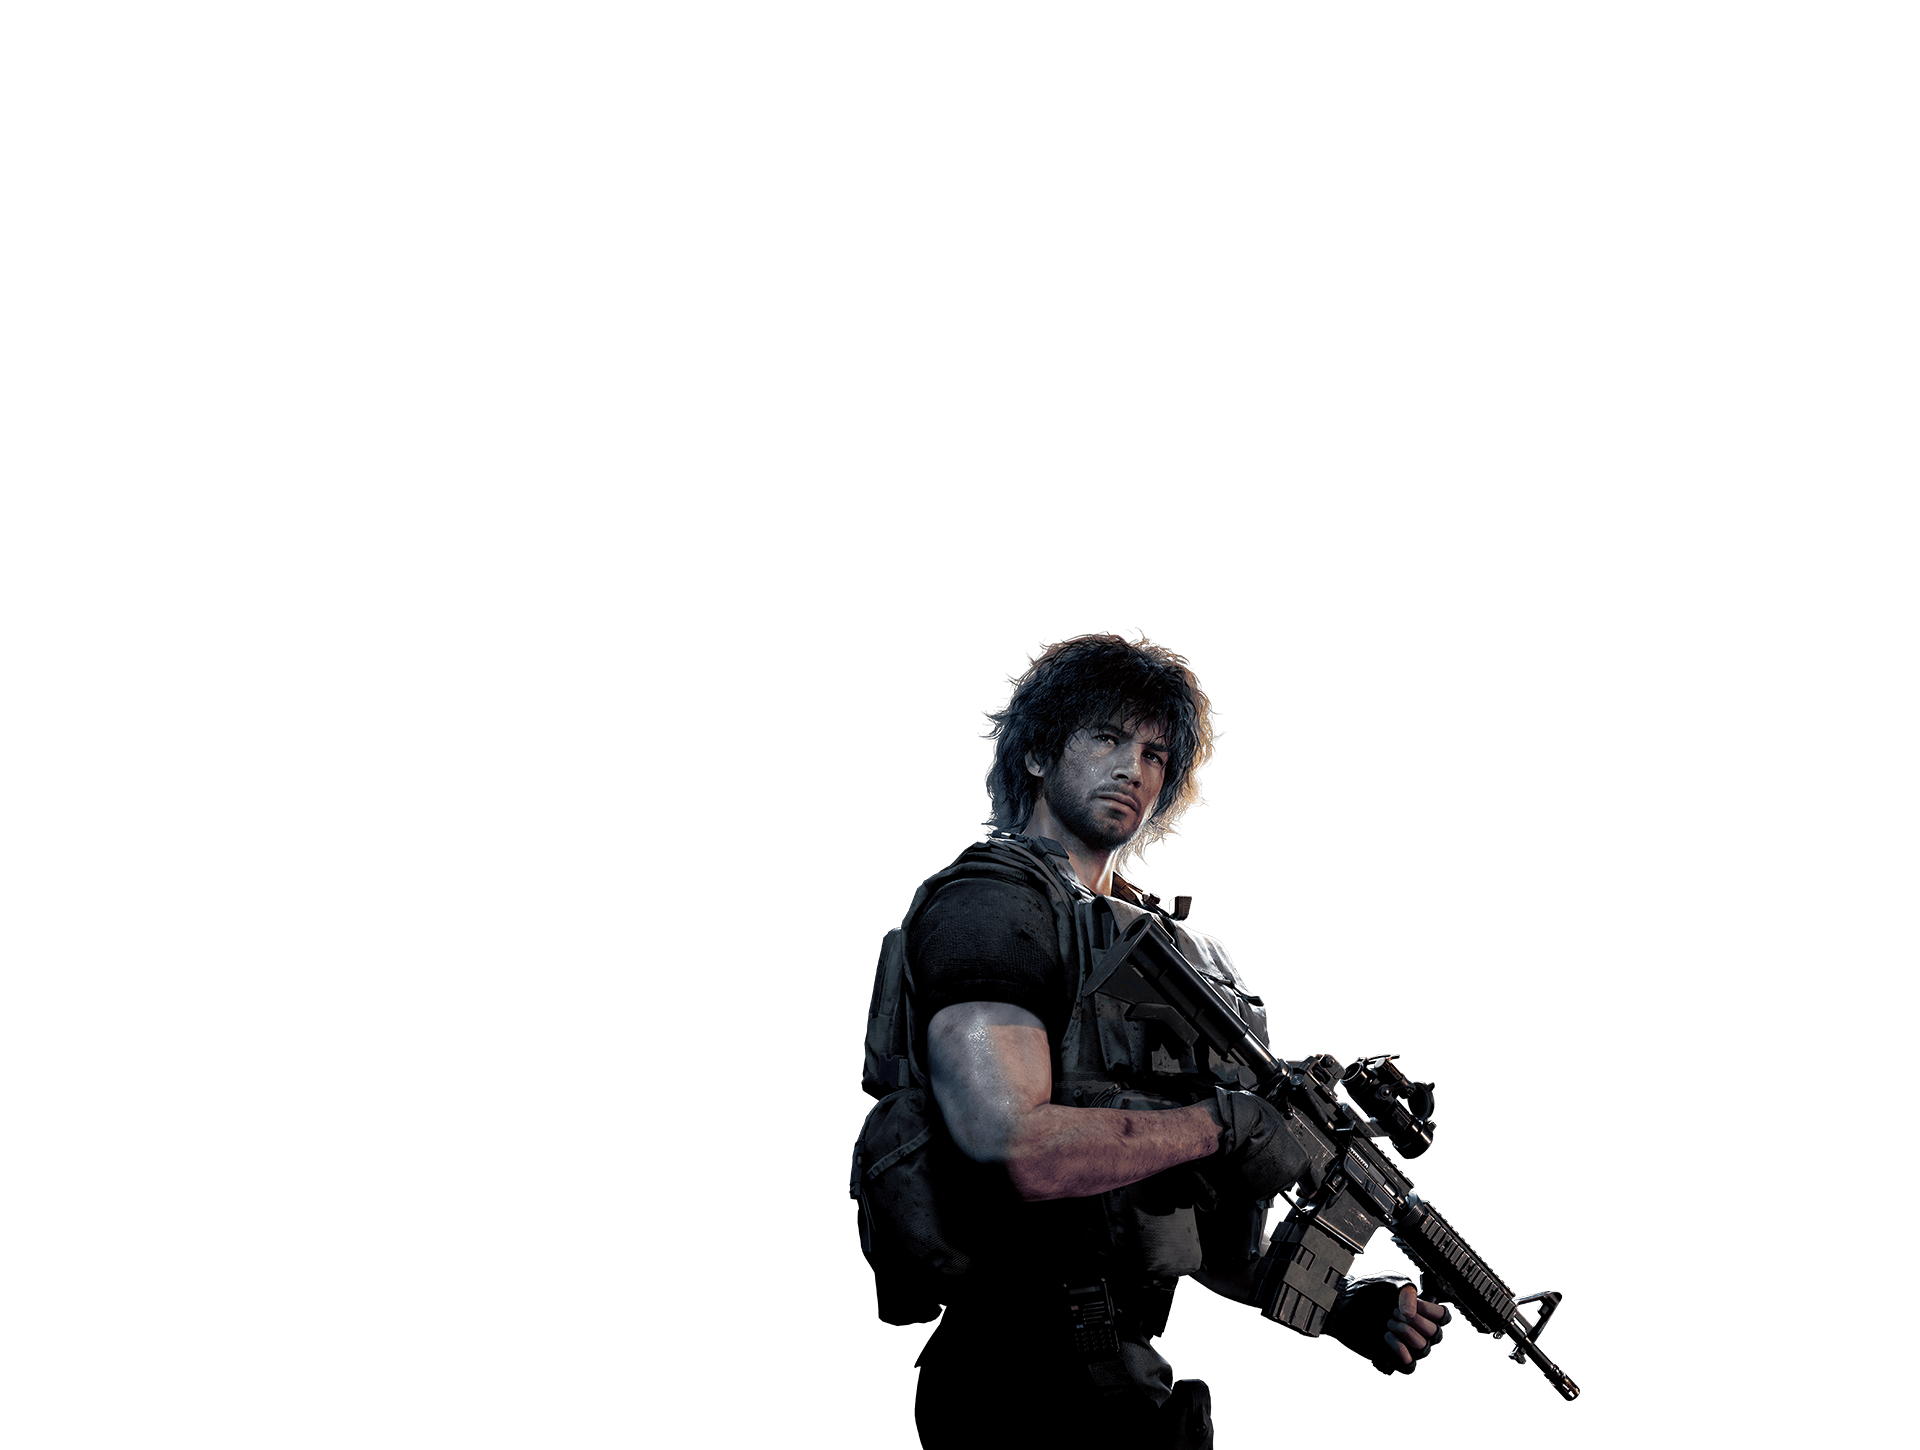 Resident Evil PNG Clipart